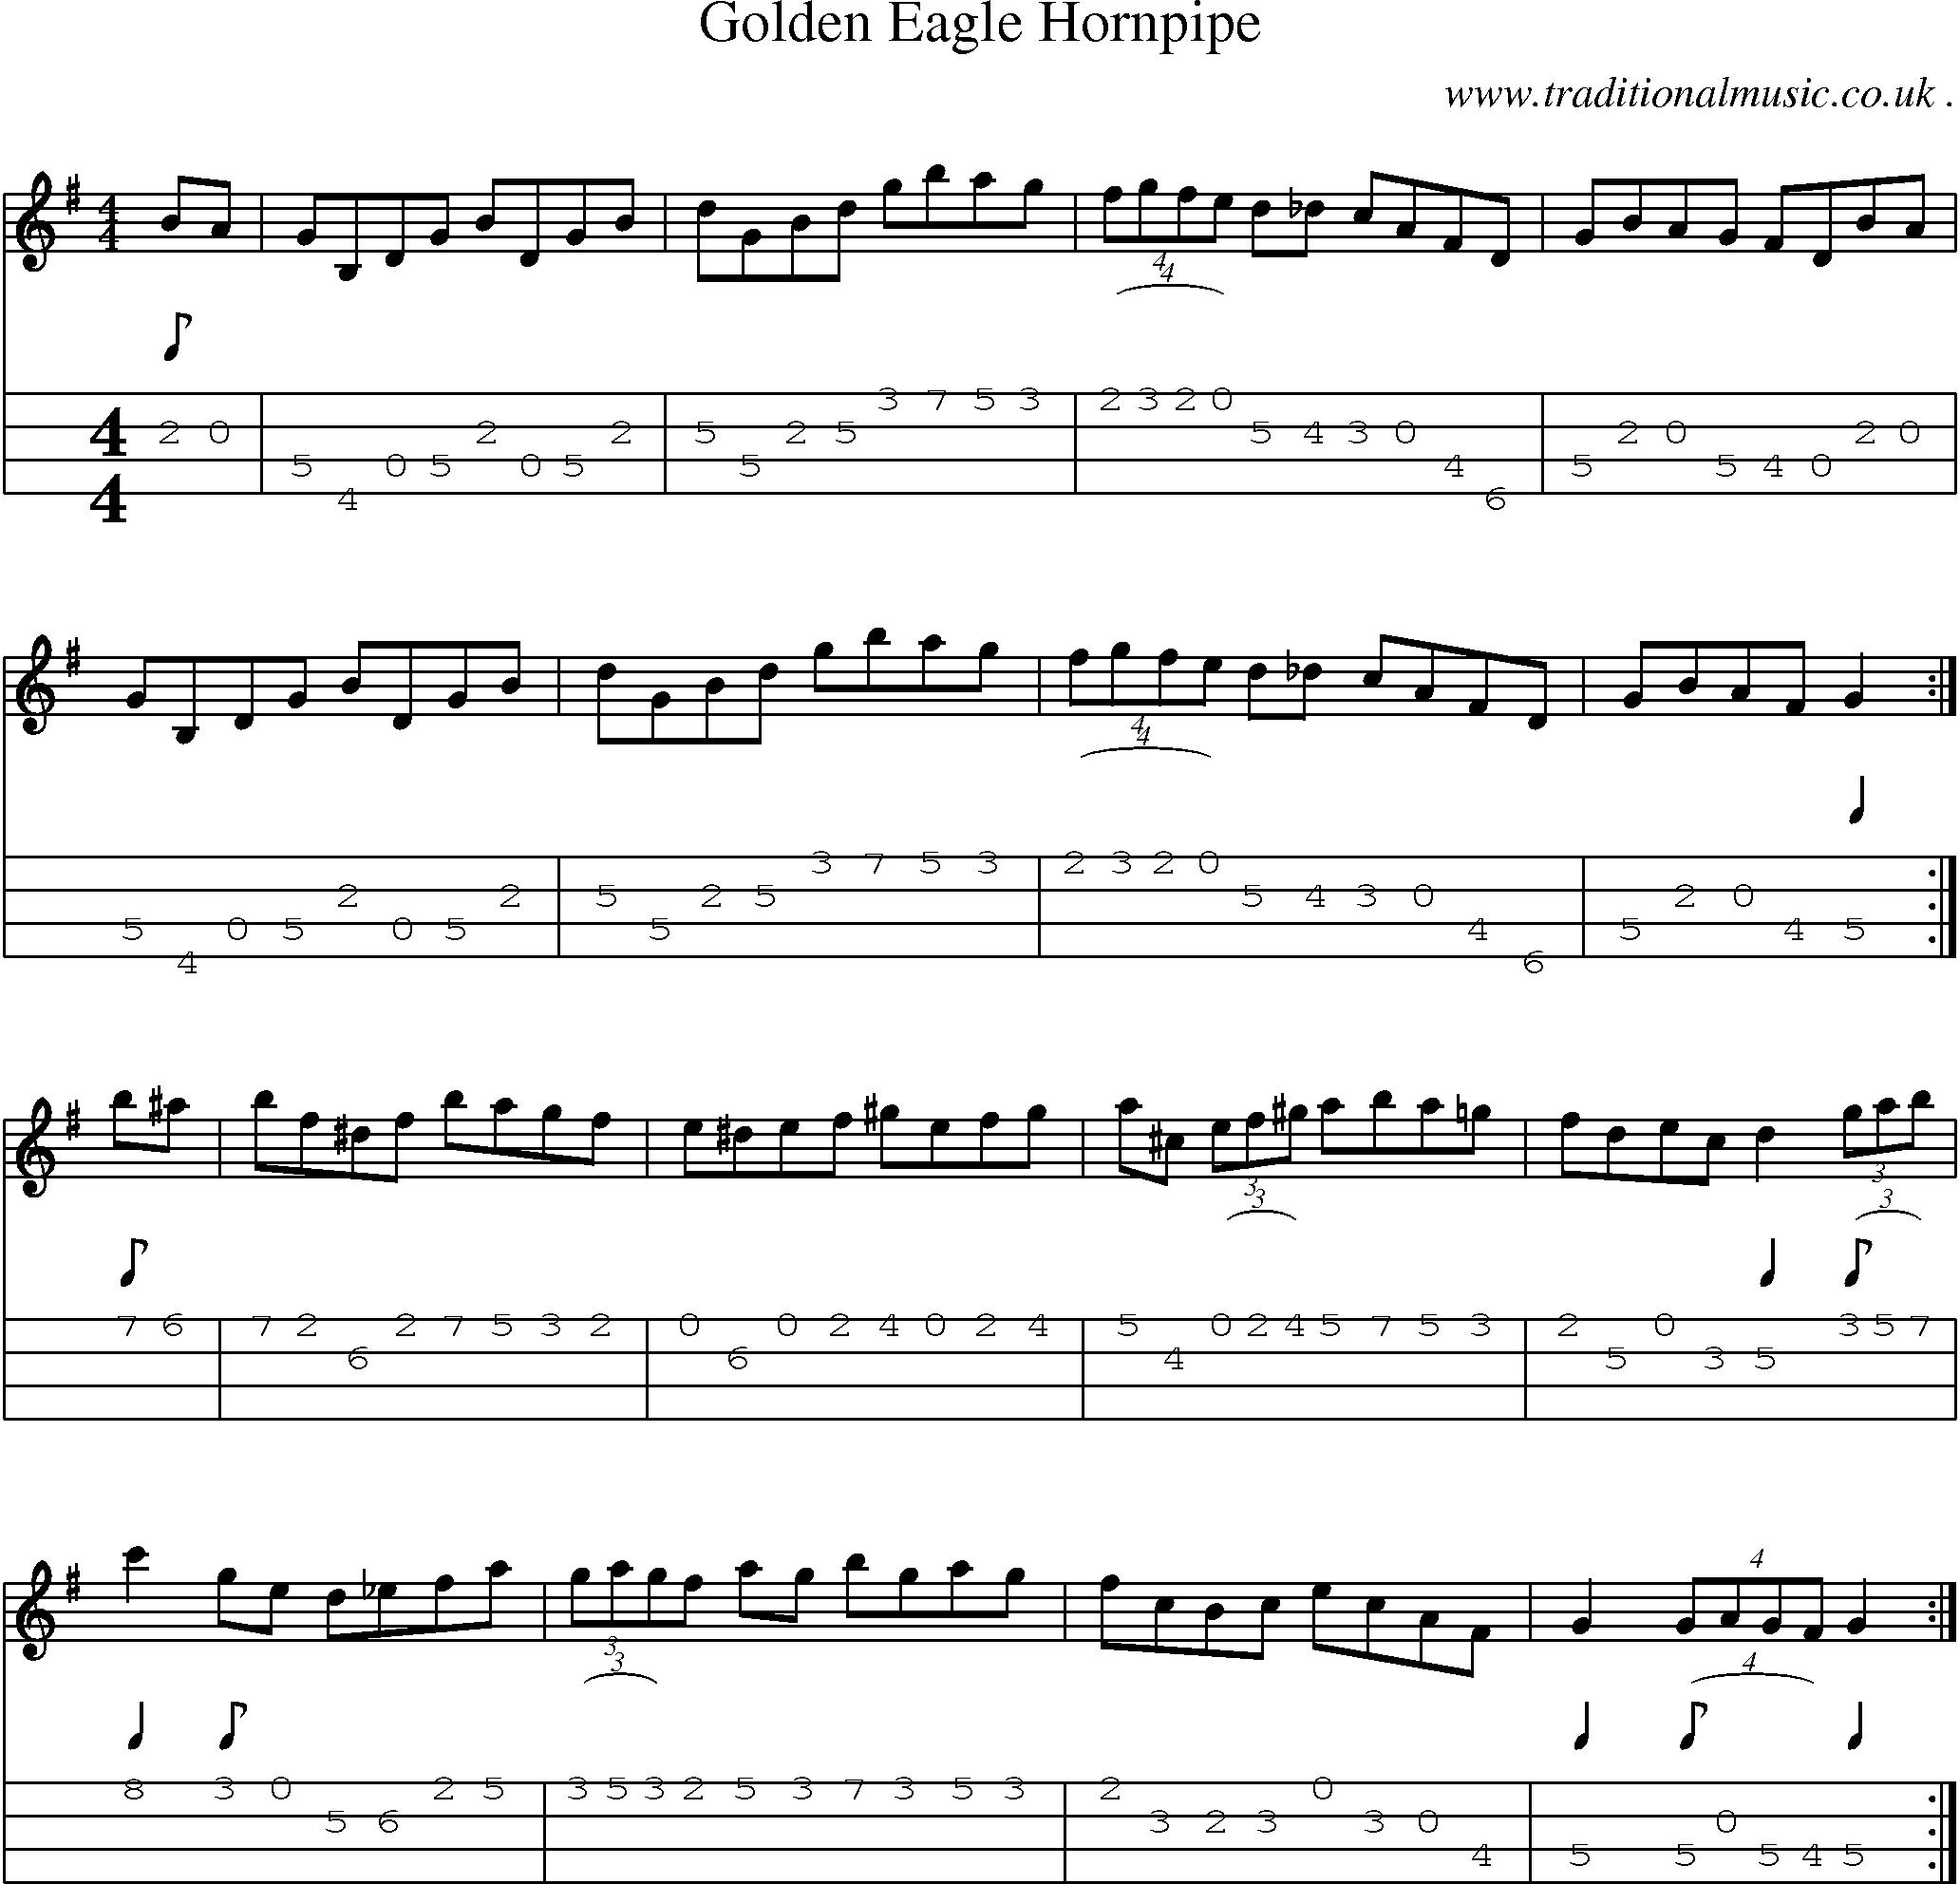 Music Score and Mandolin Tabs for Golden Eagle Hornpipe